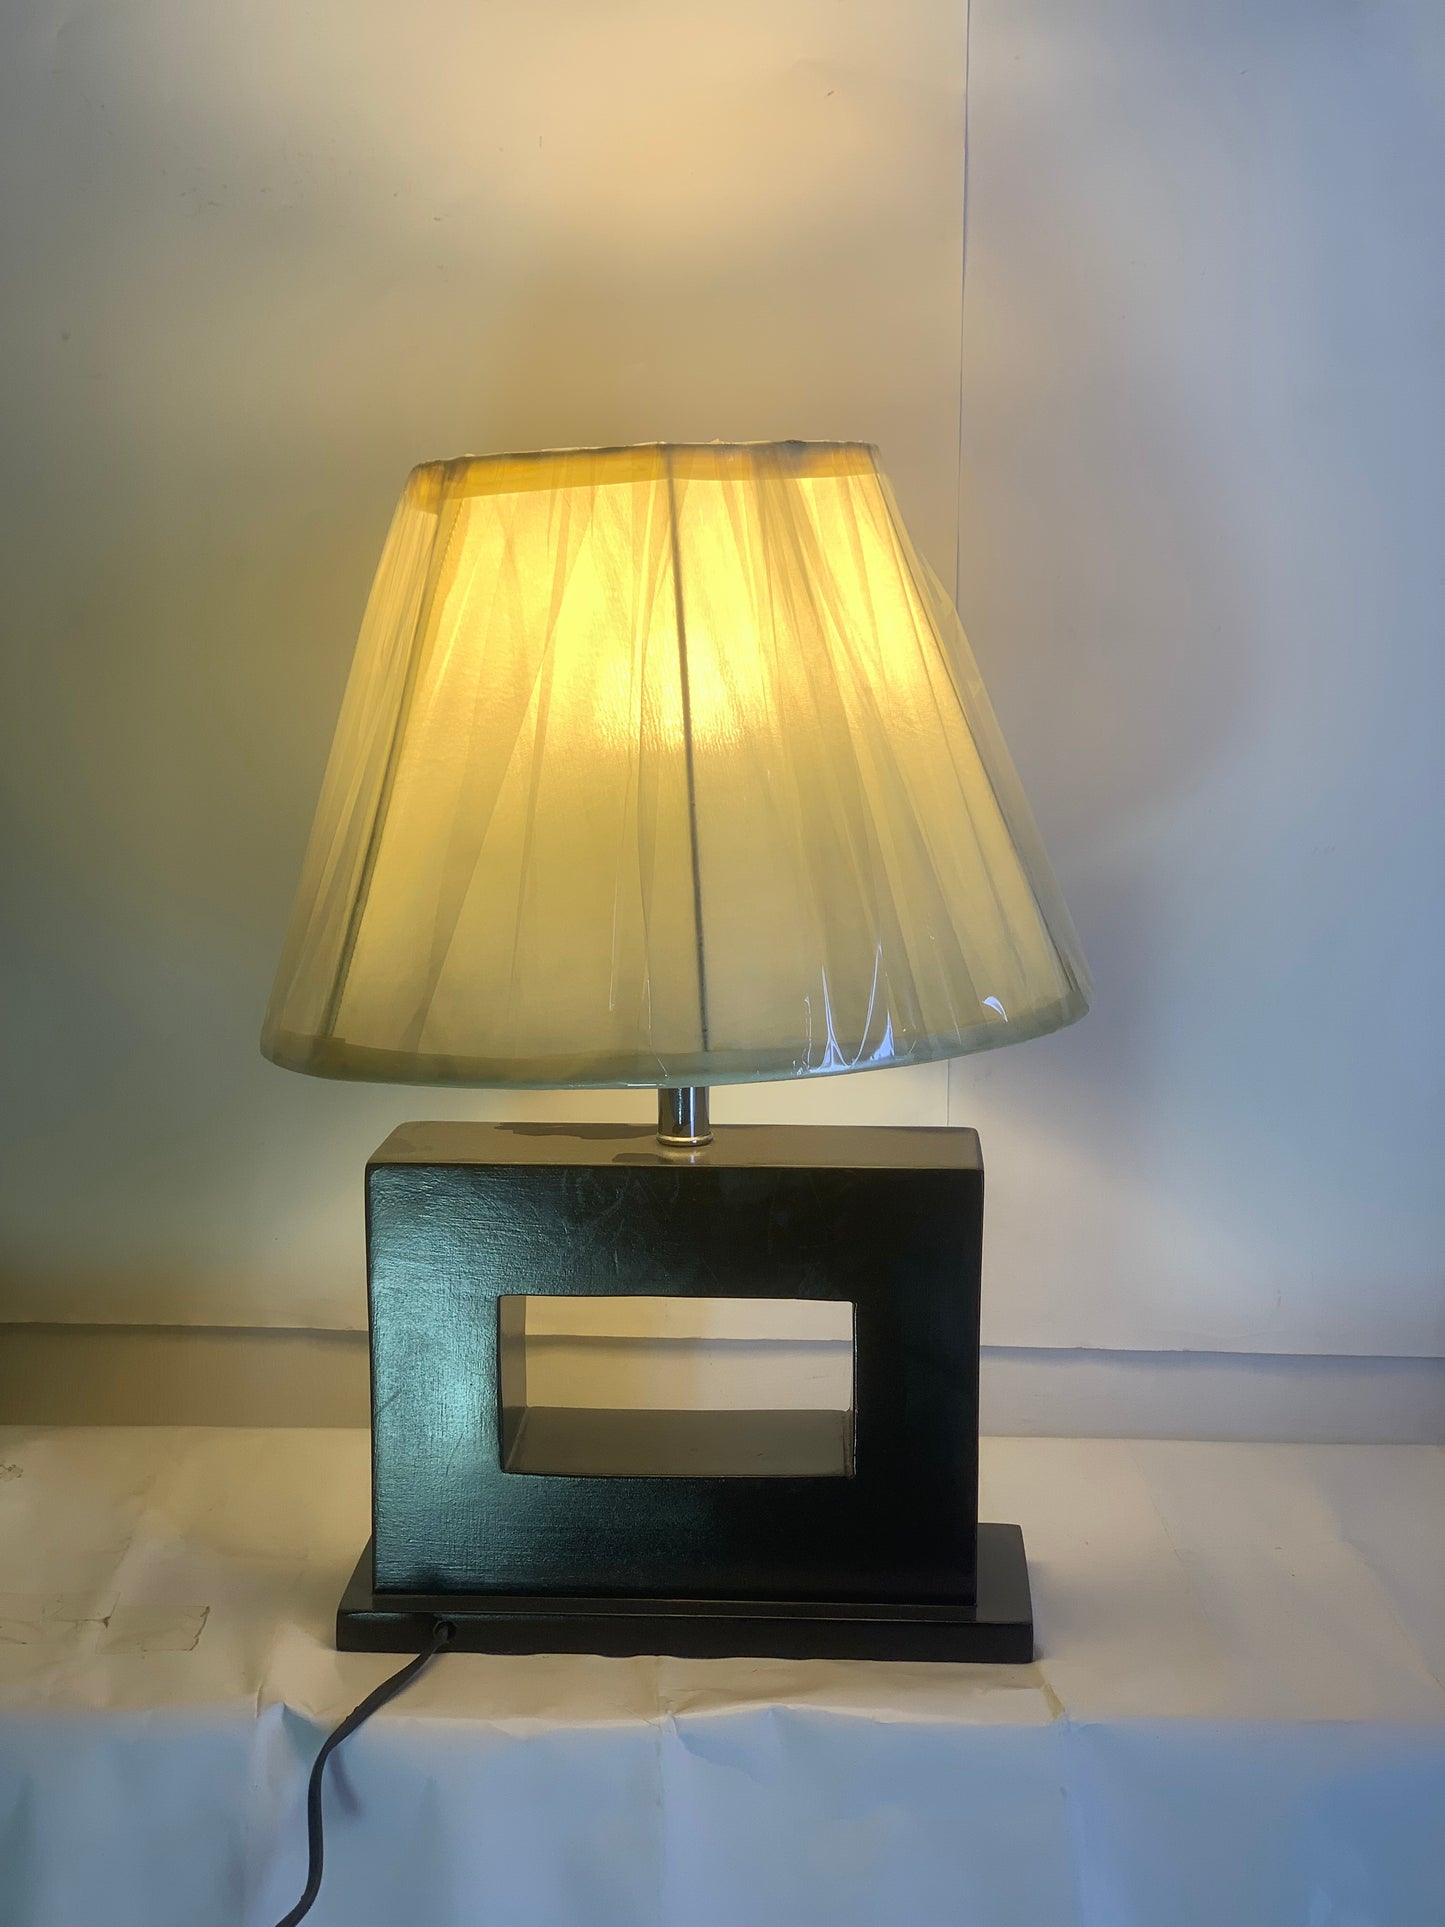 SKU : 020 -Wooden TV Type Table lamps